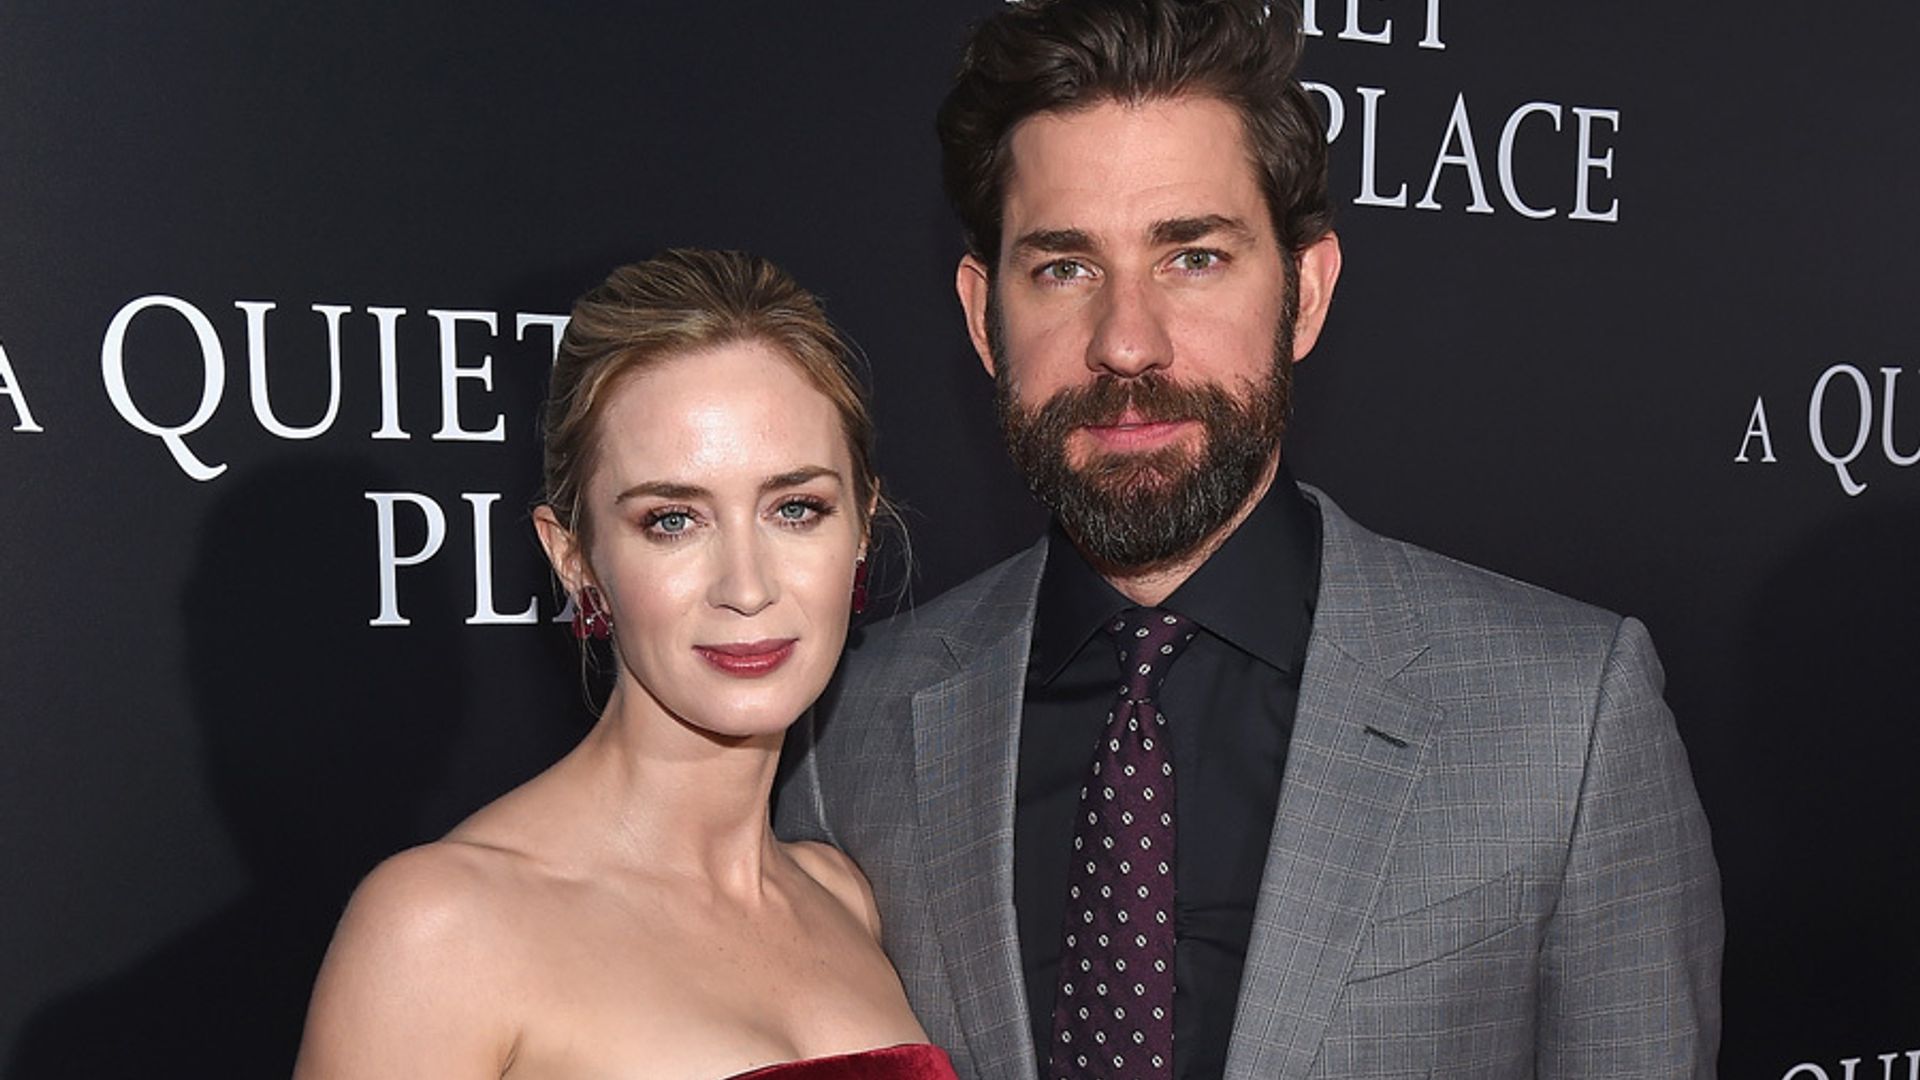 John Krasinski and Emily Blunt on their first movie together and the extremes they would go to as parents